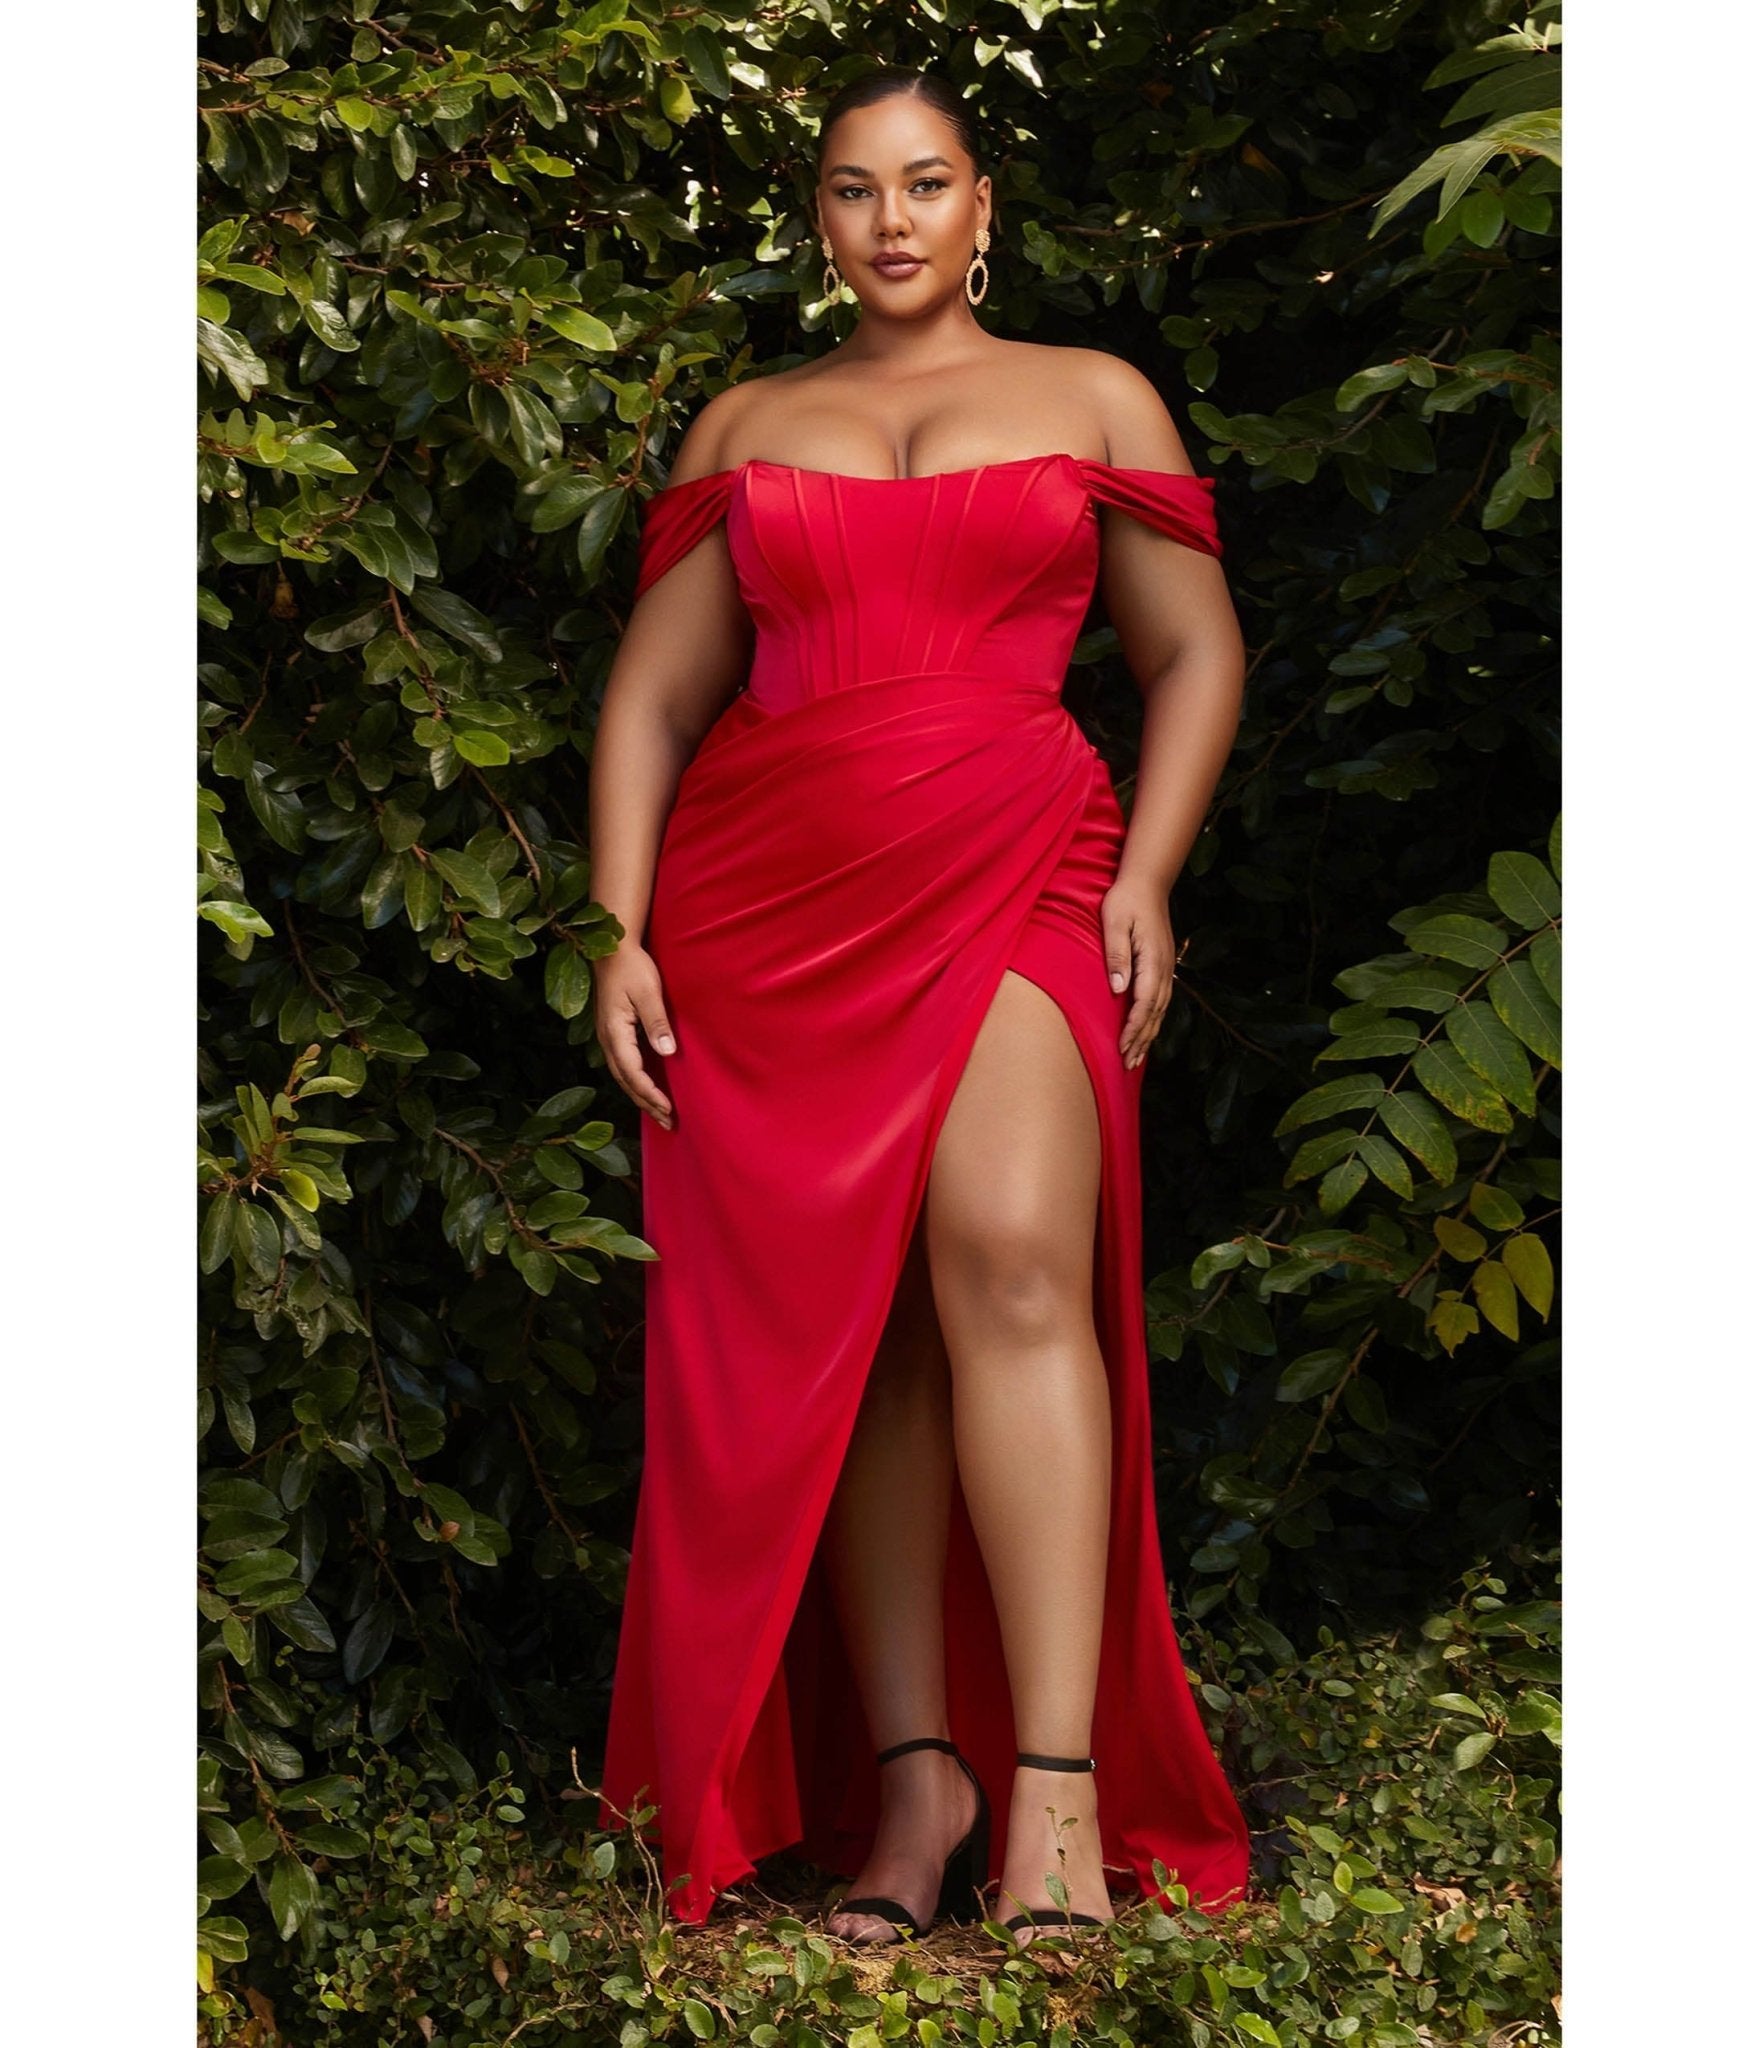  Plus Size Corset Dress Wrap Dress Off Shoulder Wedding Dress  Satin Evening Gown Long Sleeve Long Dress Formal Red Dress Sexy Prime Deals  : Clothing, Shoes & Jewelry